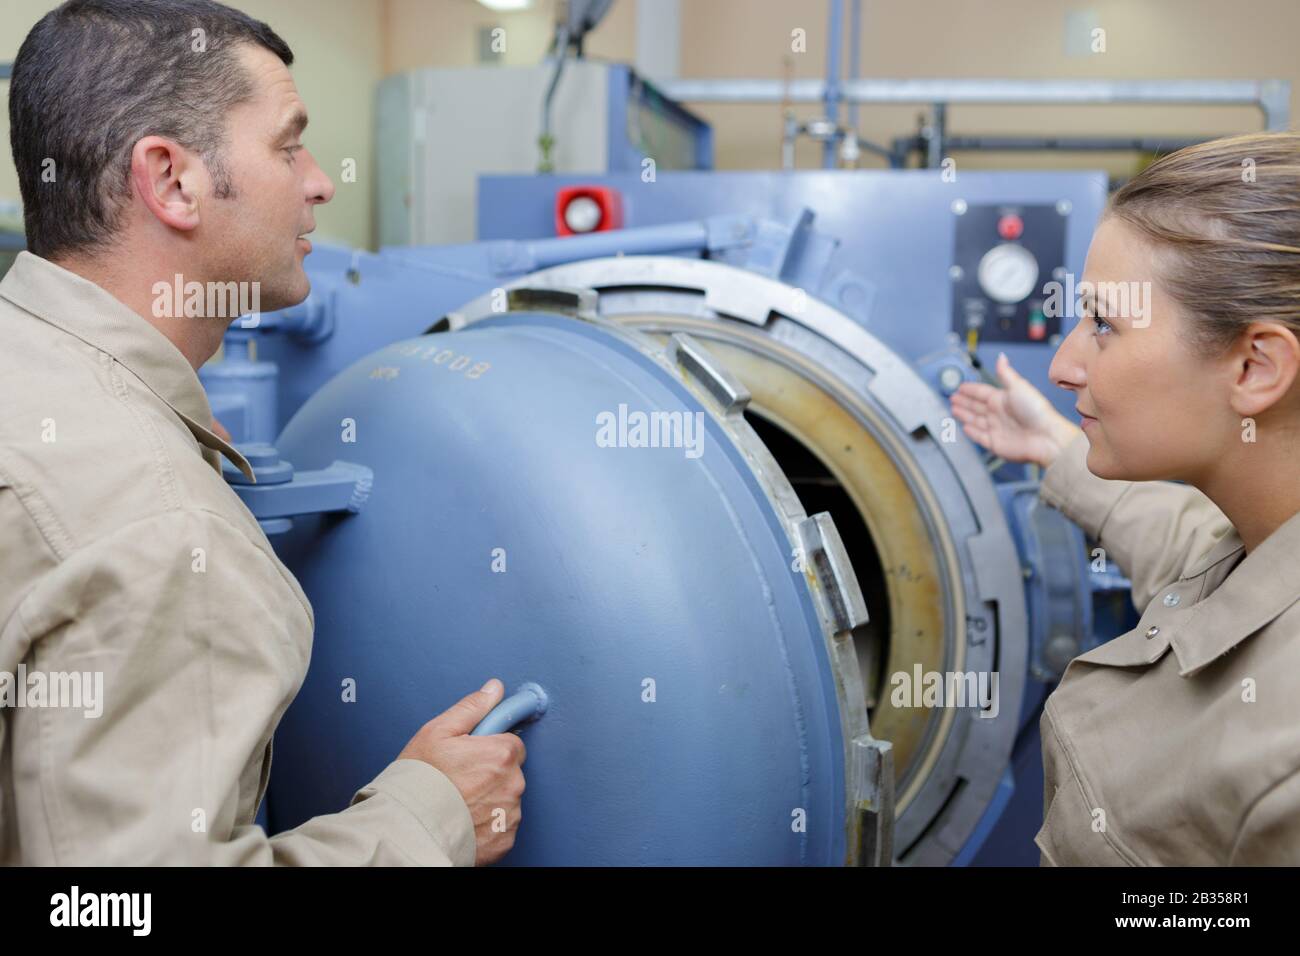 workers handling equipment for lifting industrial boilers Stock Photo